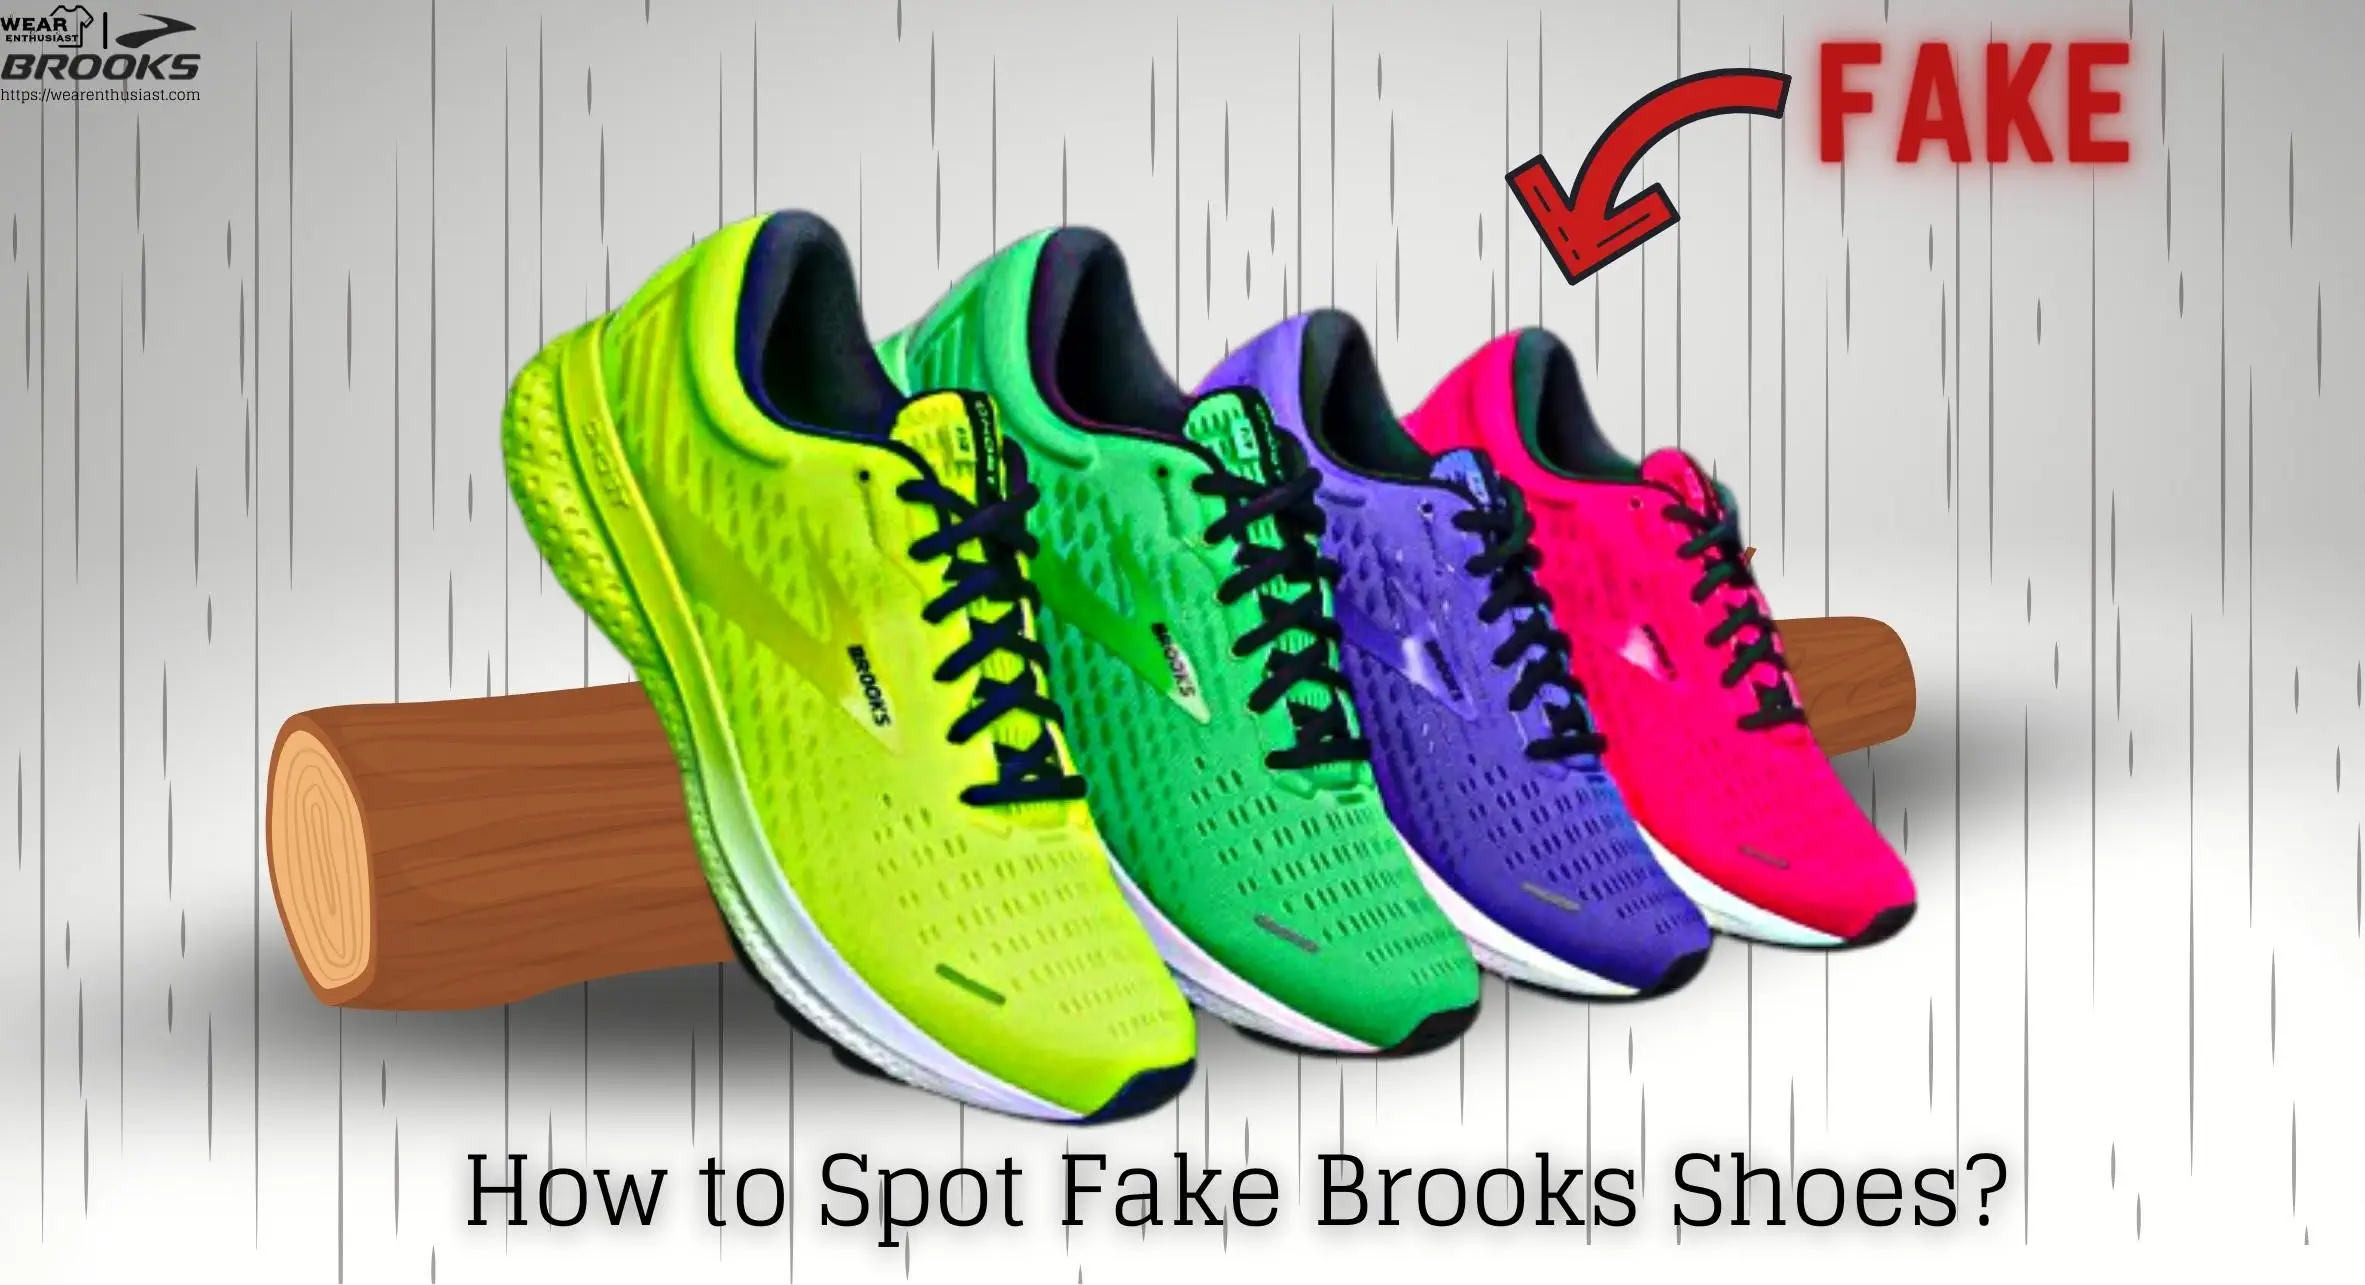 How to Spot Fake Brooks Shoes?